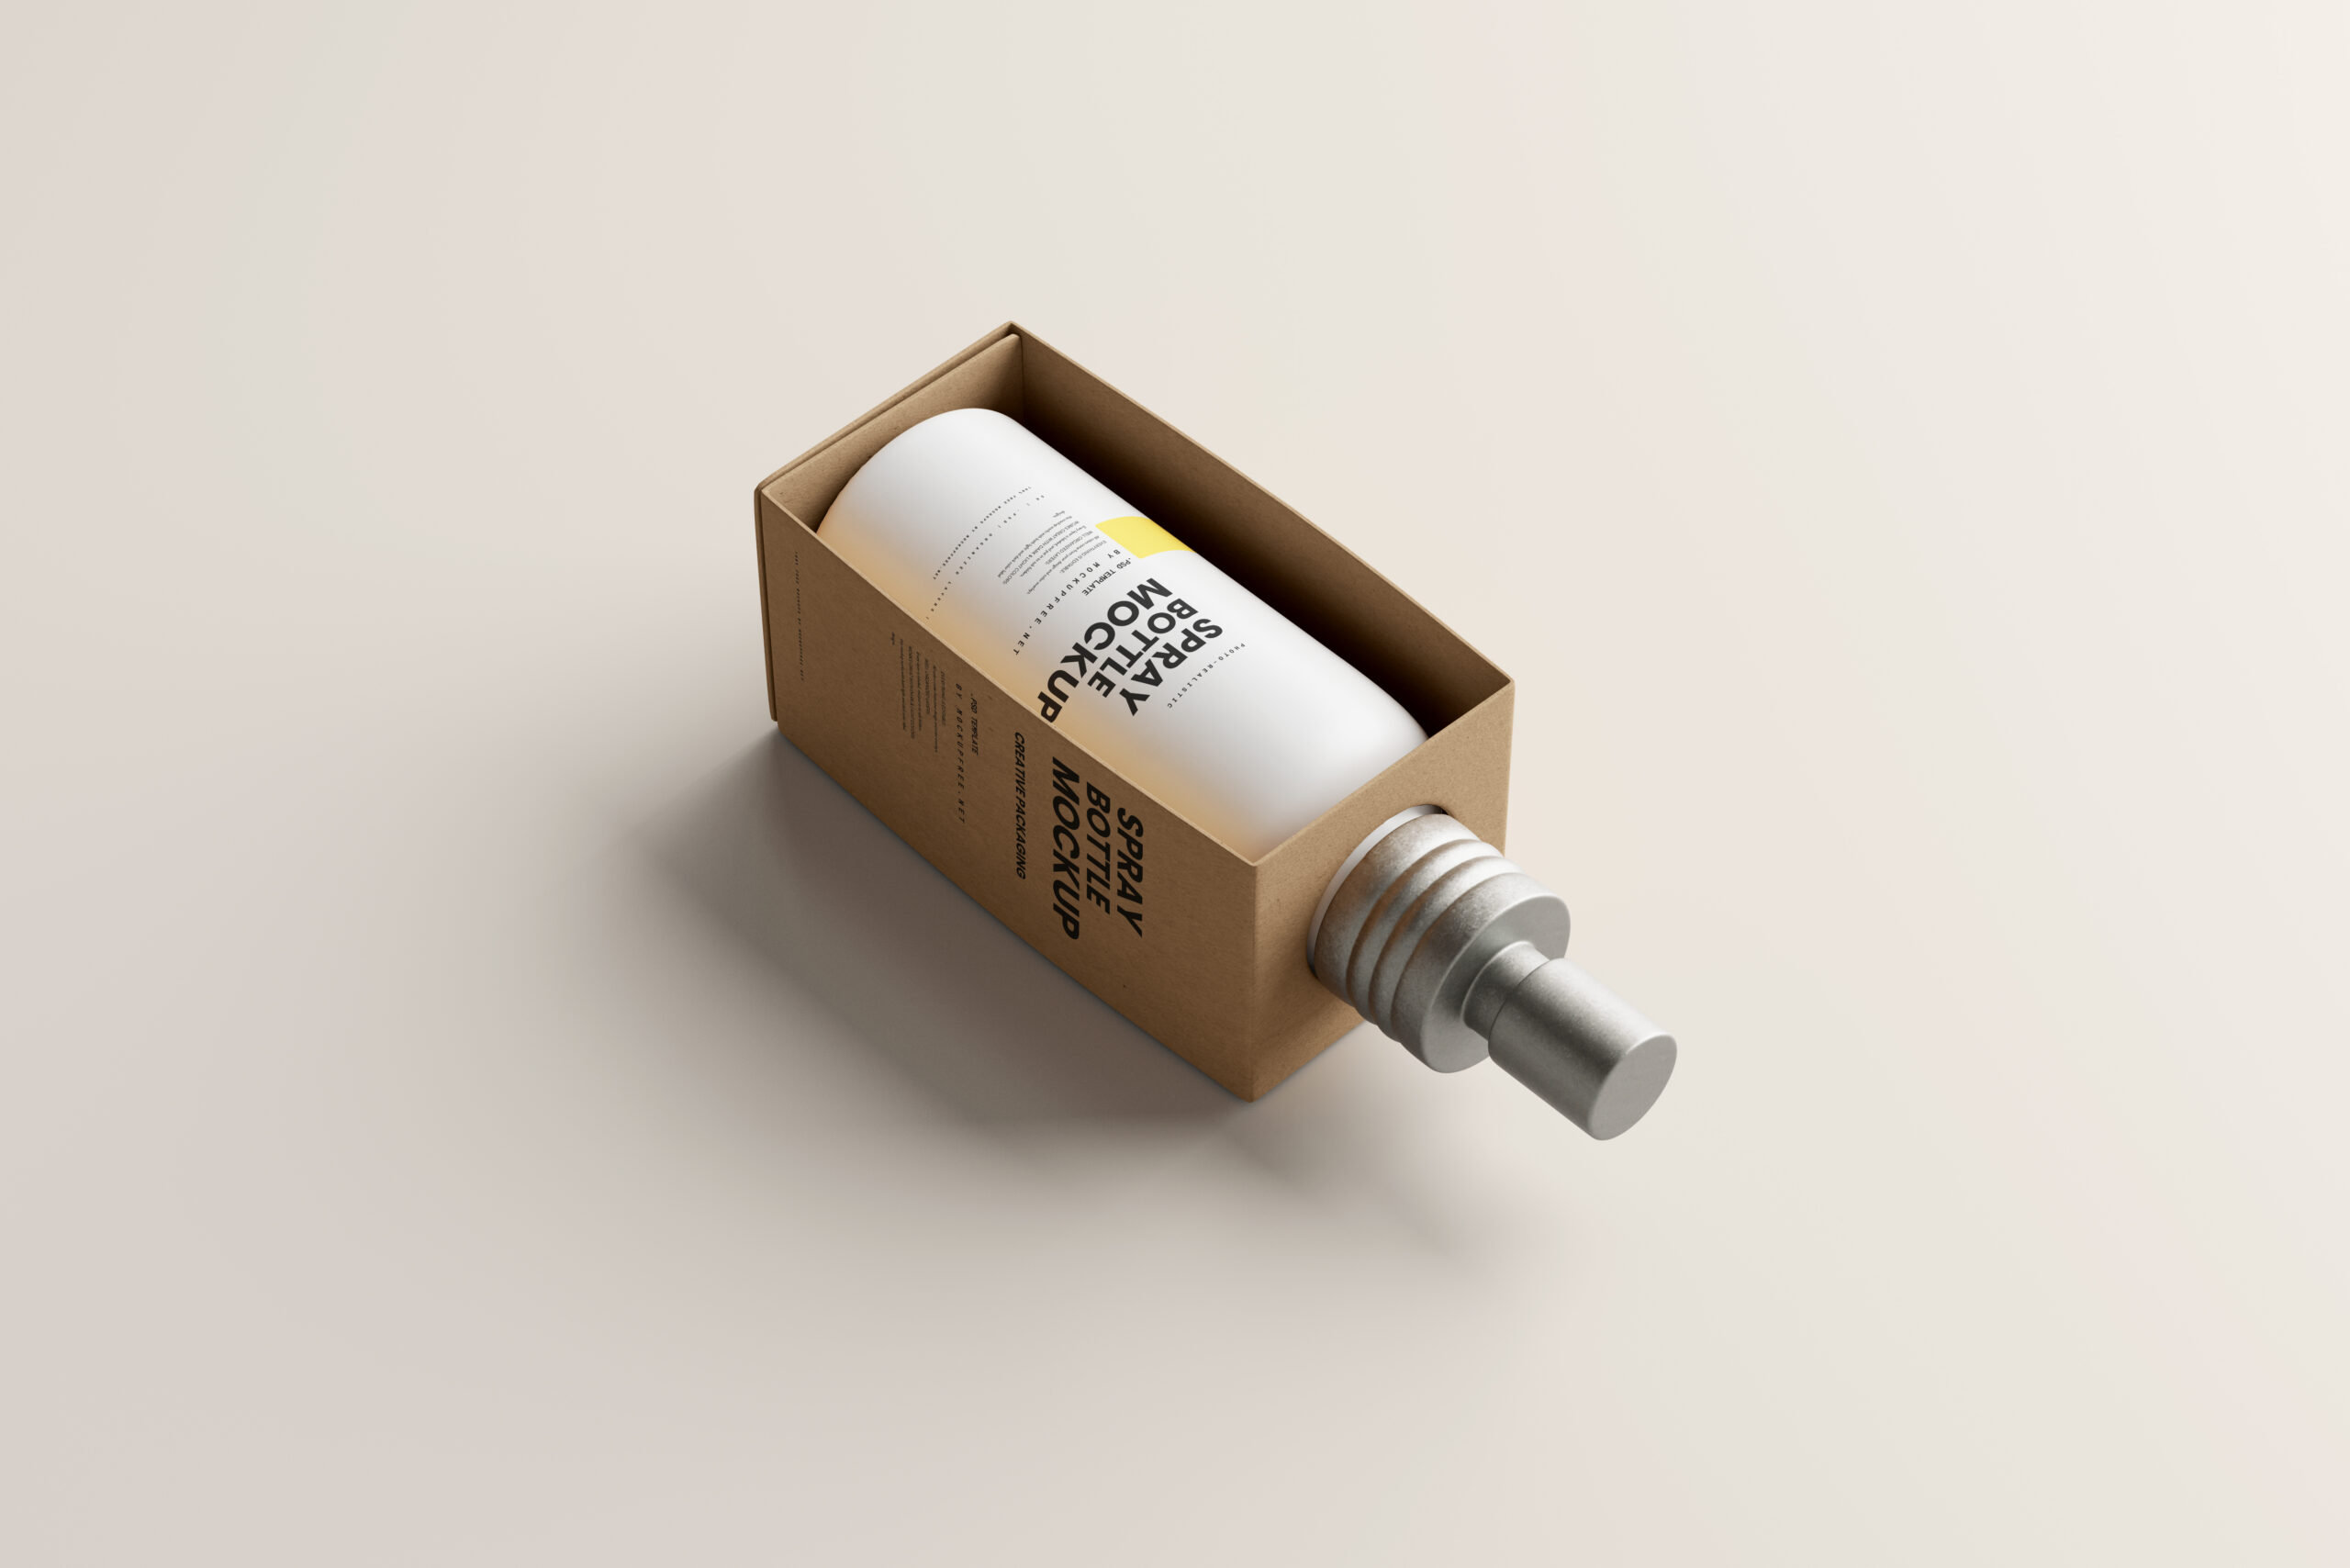 Varied Sights of 5 Cosmetic Spray Bottles Mockups with Novel Packaging FREE PSD